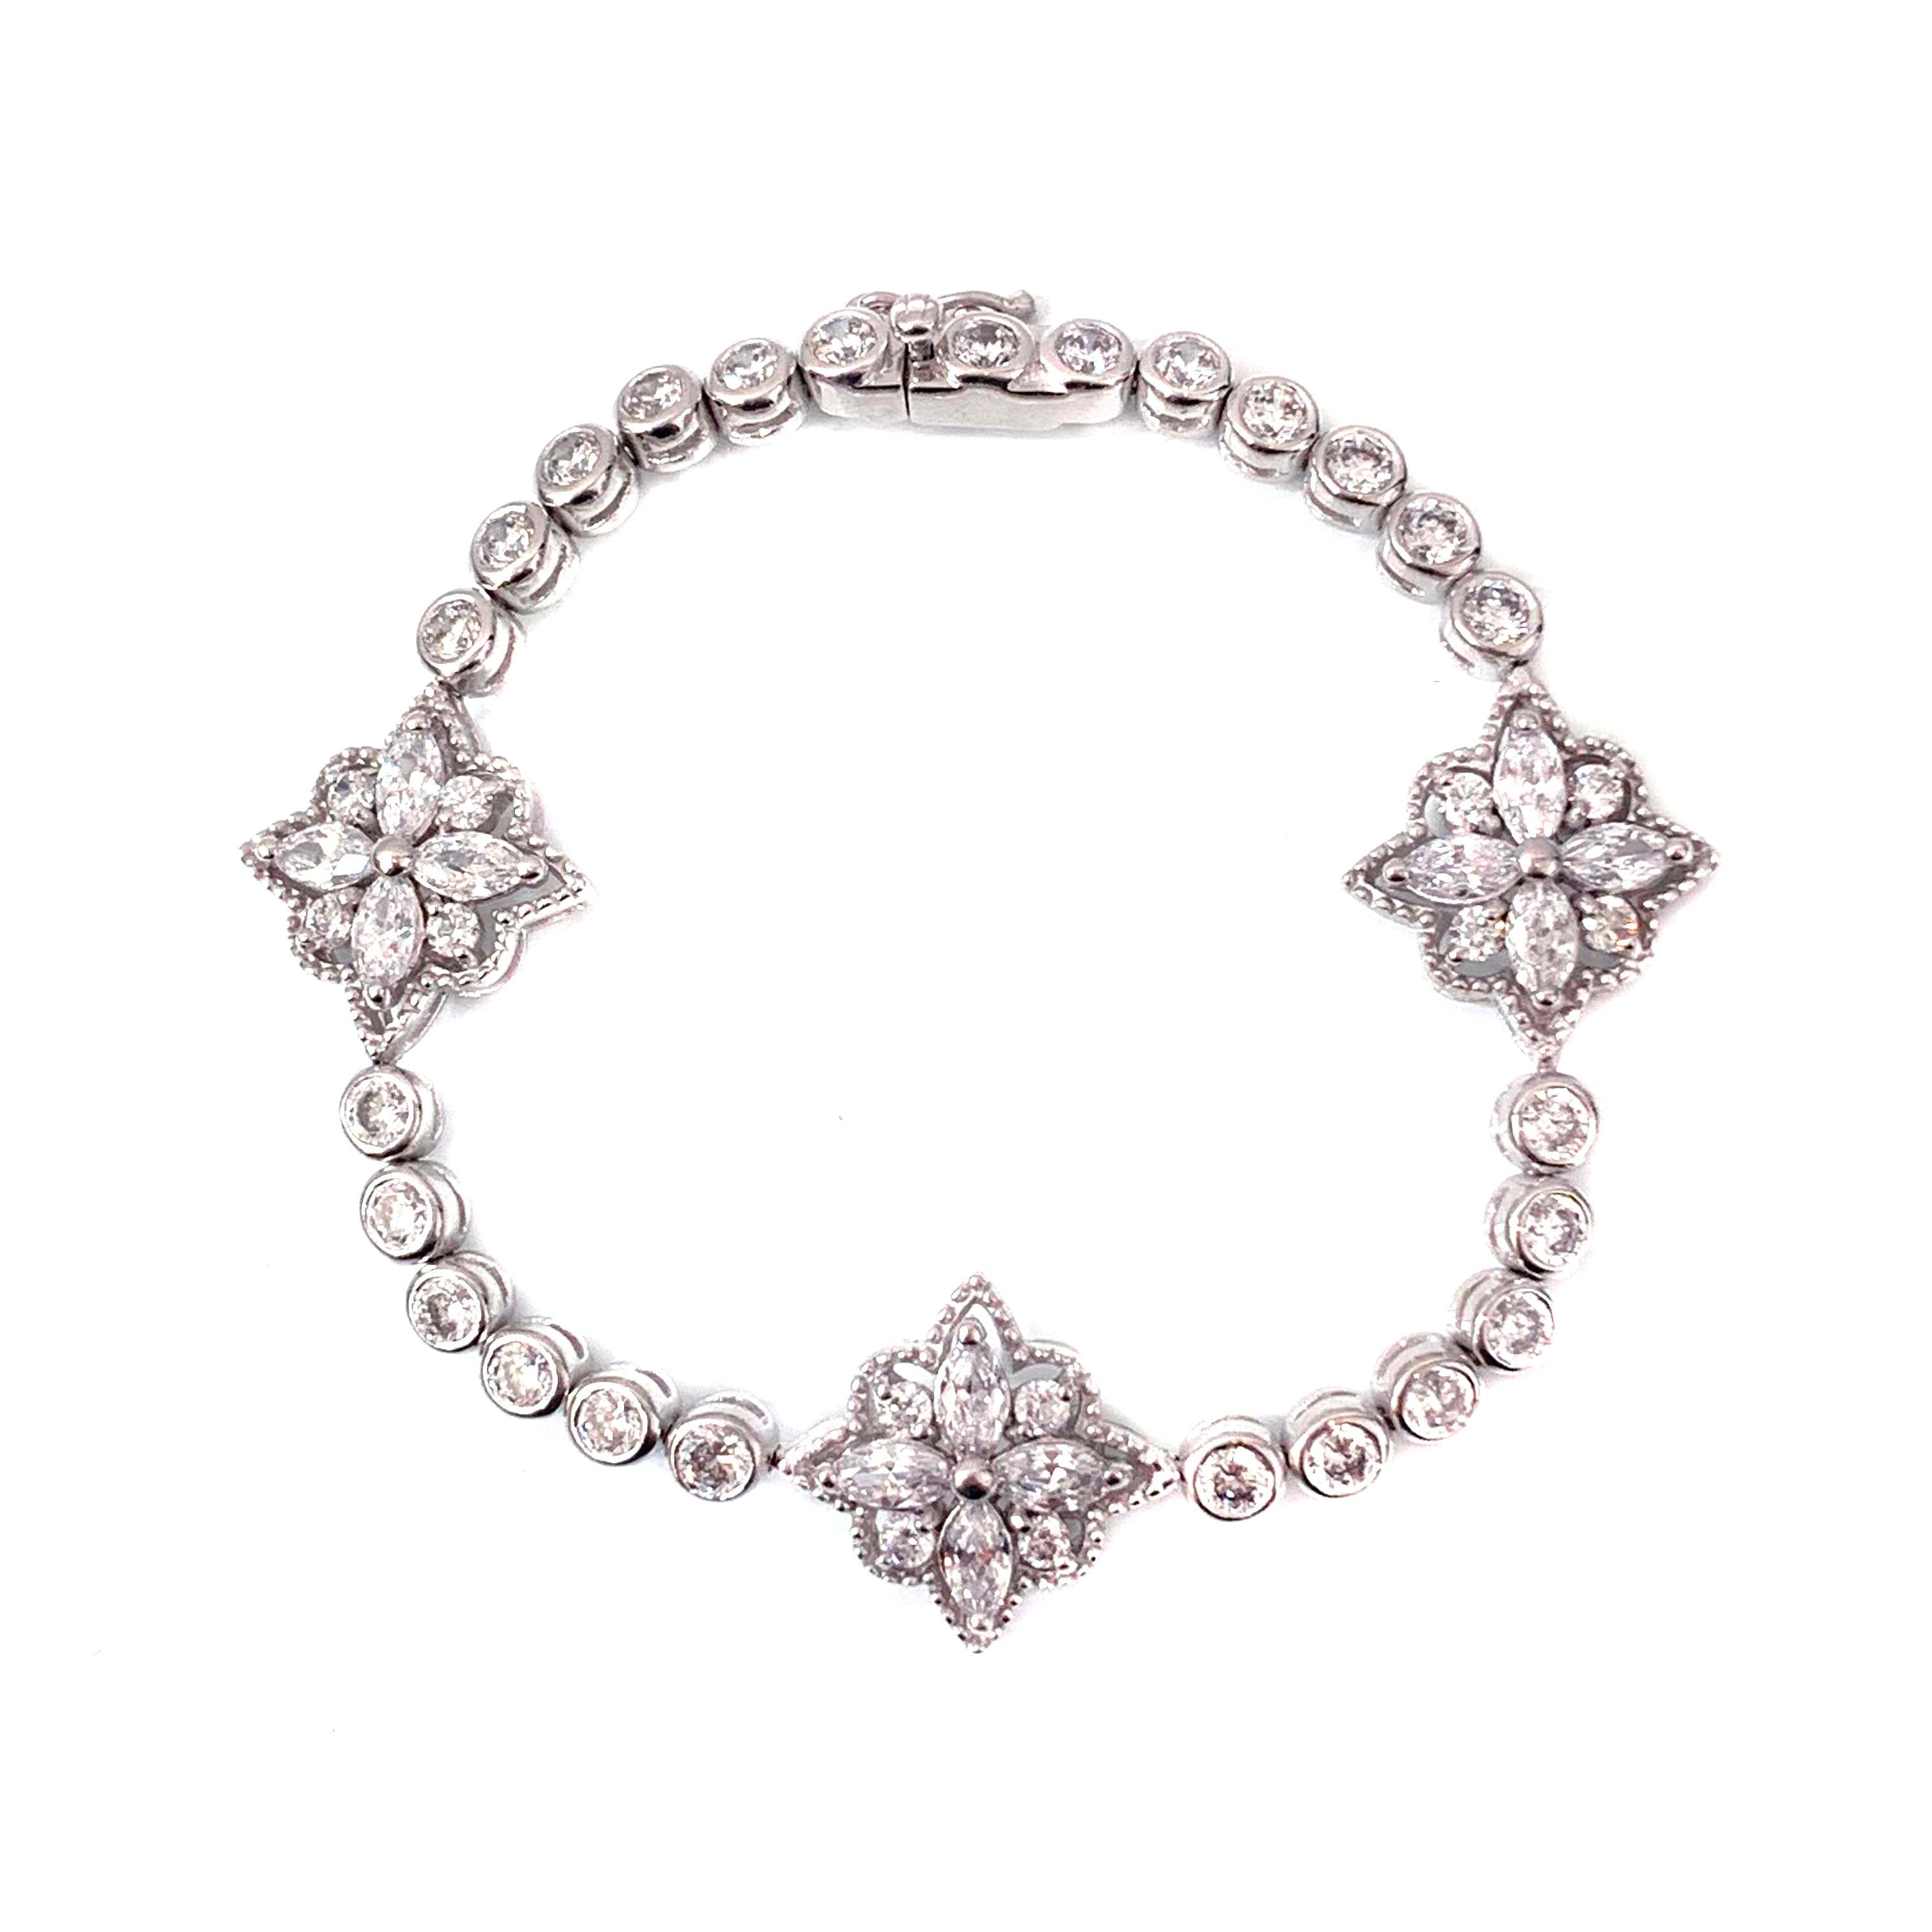 Bijoux Num Byzantine Flower Simulated Diamond Sterling Silver Bracelet

Beautiful bracelet featuring 3 byzantine flowers with etching design encrusted with marquis and round shape simulated diamonds, hand set and interconnected piece by piece, push